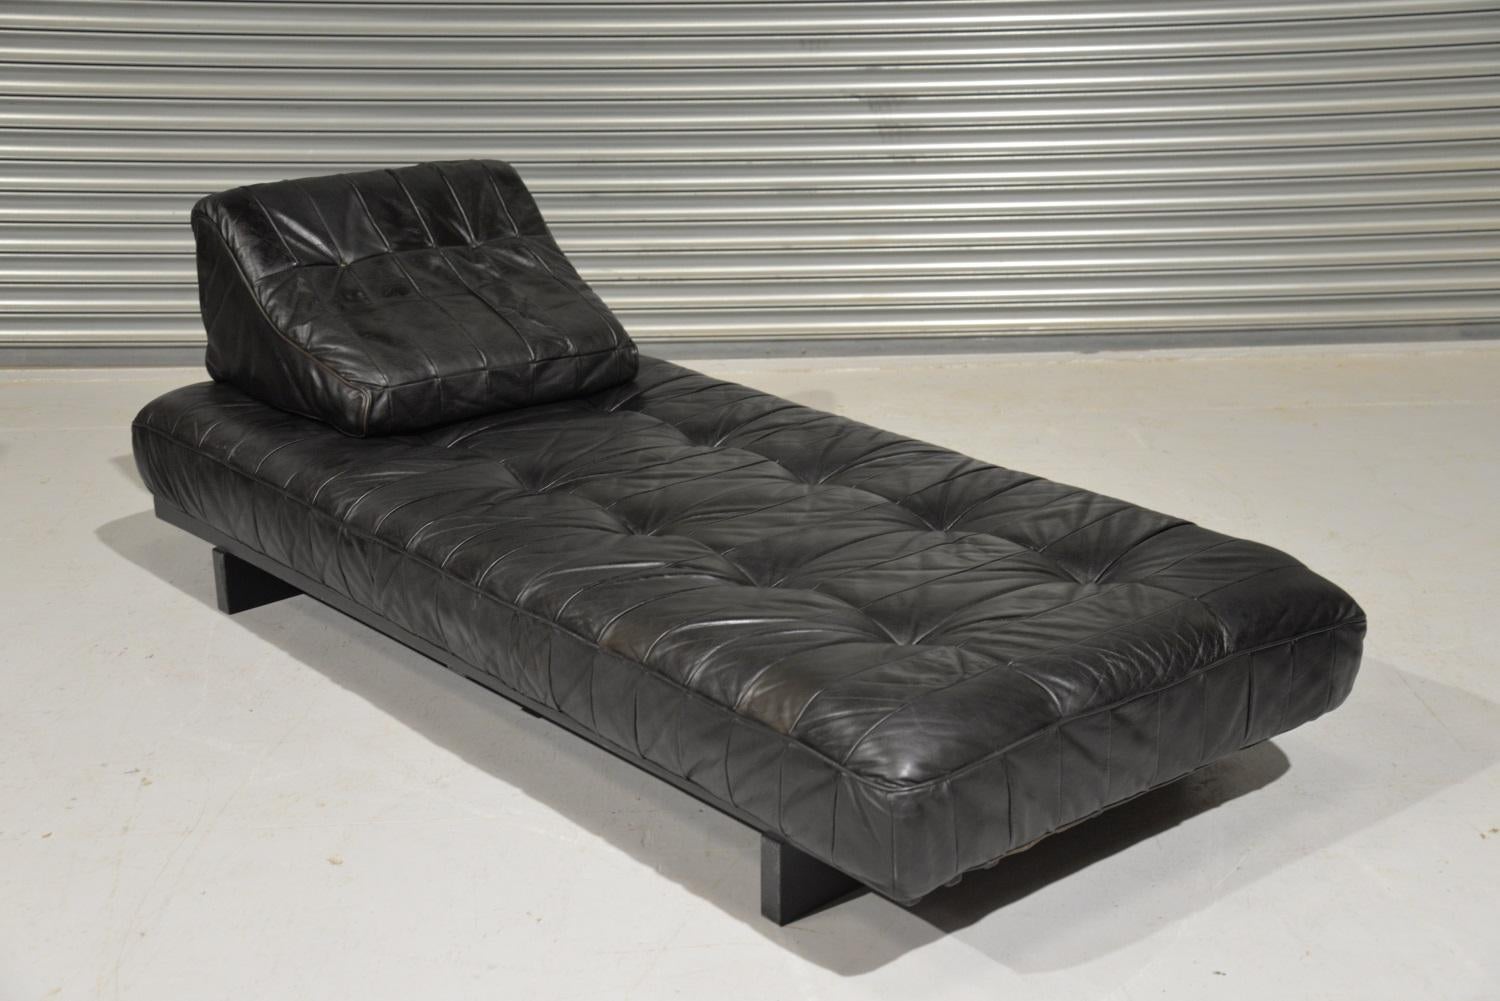 Discounted airfreight for our US and International customers (from 2 weeks door to door).

We are delighted to bring to you an extremely rare and highly desirable original vintage daybed. Hand built in the 1960s by De Sede craftsman in Switzerland